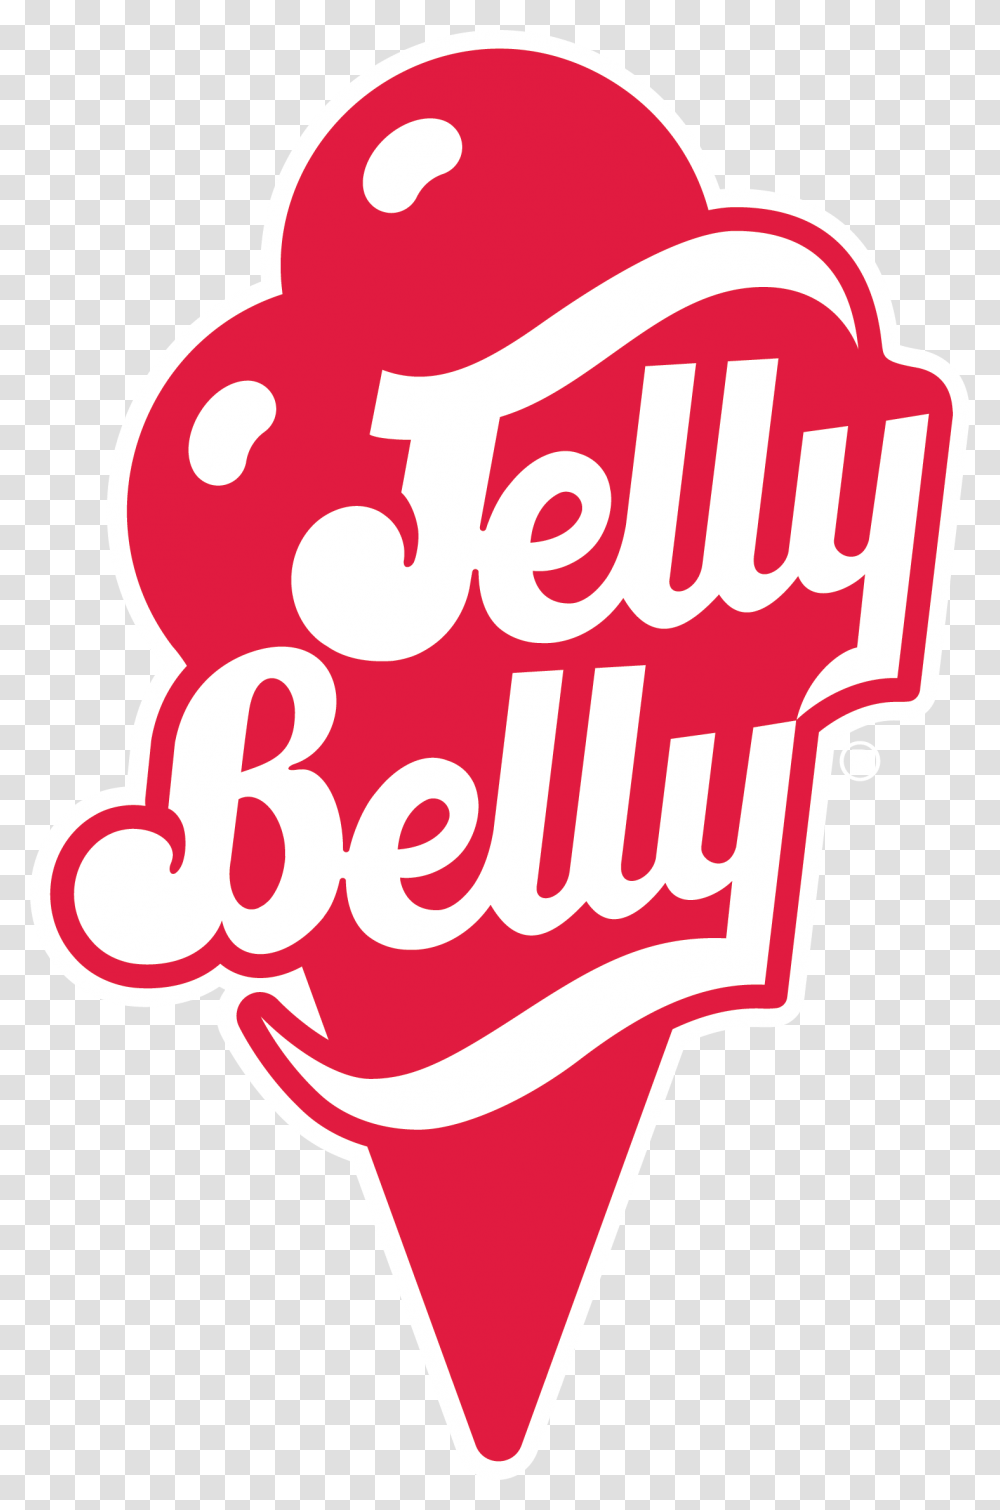 Jelly Belly Ice Cream Uaes First Jelly Belly Gourmet Ice Cream, Logo, Alphabet Transparent Png